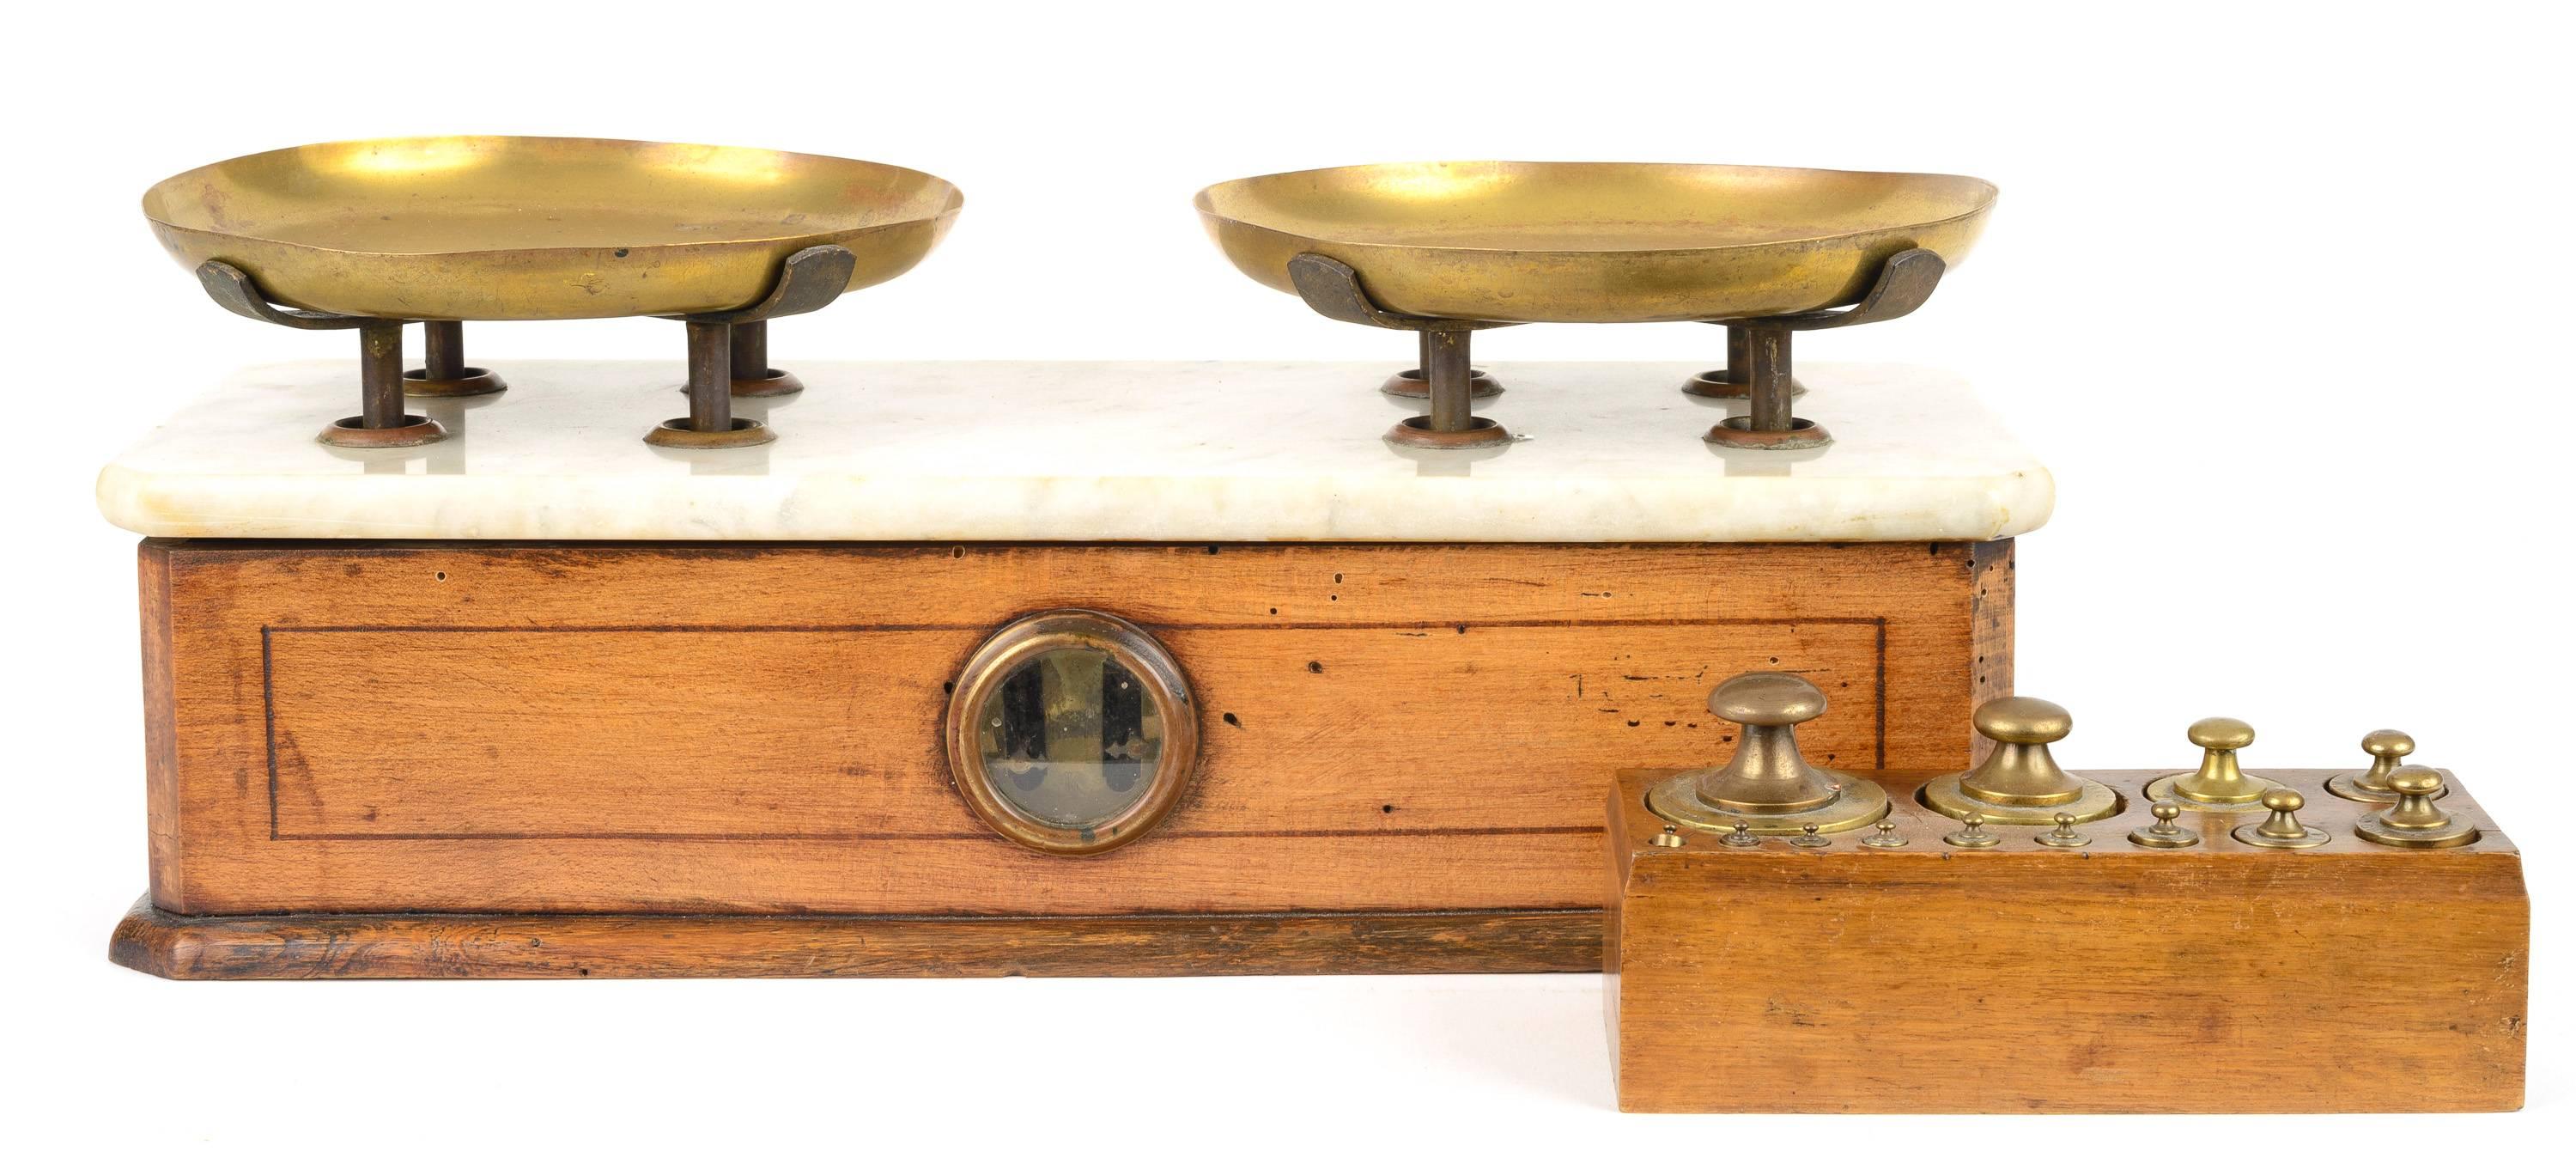 Cherrywood, marble and brass French scale with inlaid detail. It has a full set of eight calibrated weights up to 1 KG. This is the type of balance you would find in butcher or produce shop.